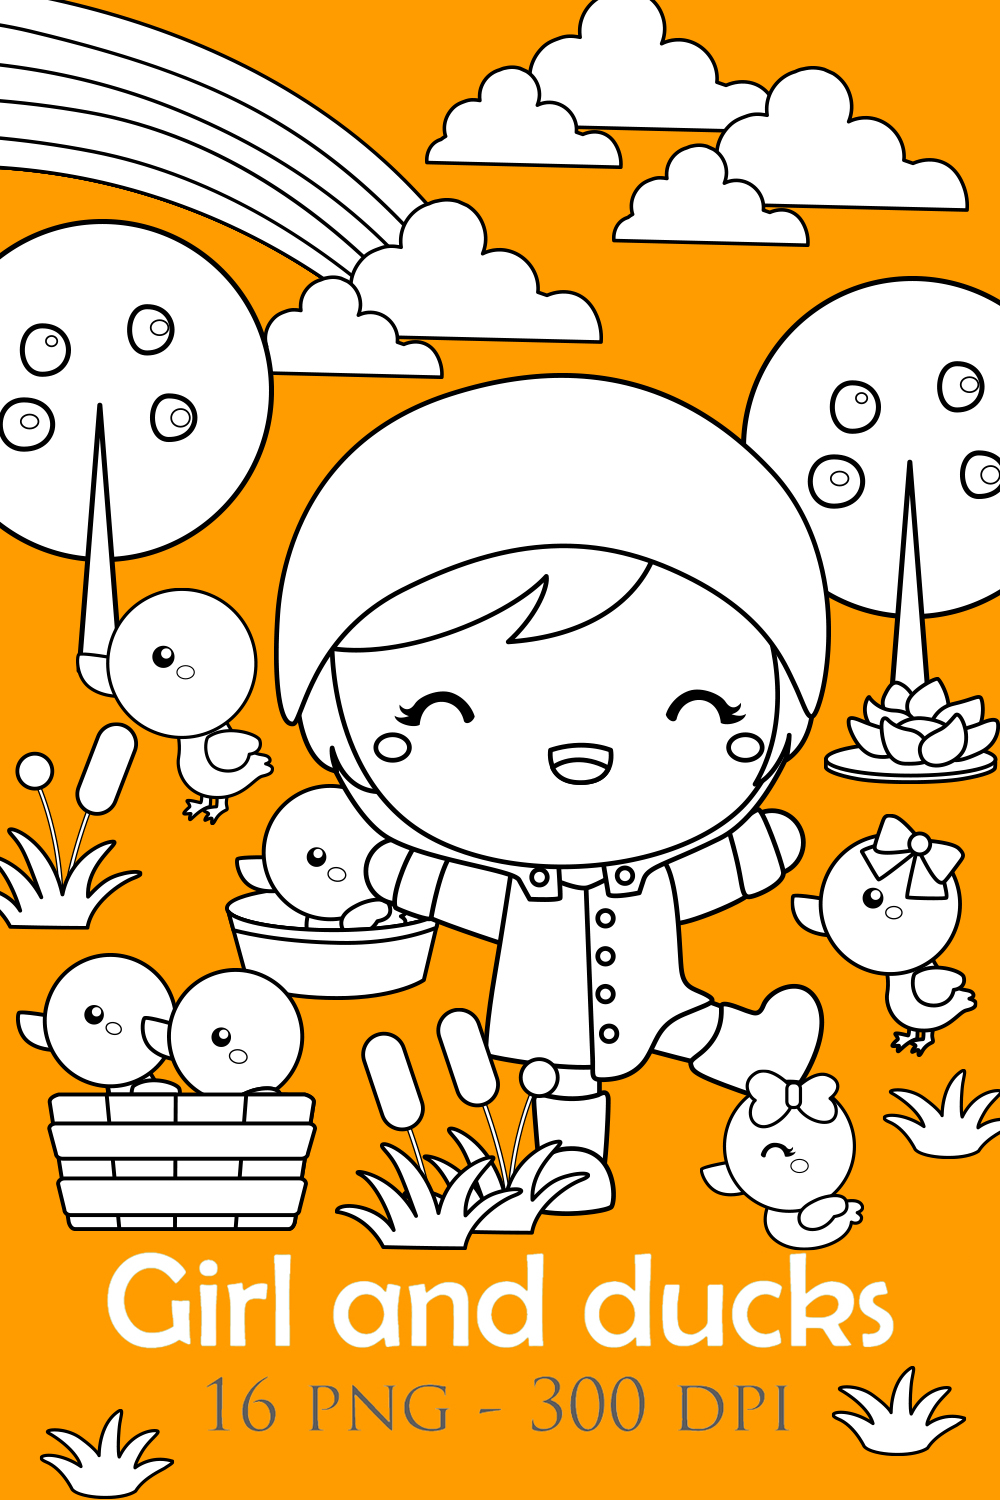 Cute and Happy Girls Kids and Animal Ducks Playing Activity Park Garden Nature in Yellow Theme Background Art Cartoon Digital Stamp Outline pinterest preview image.